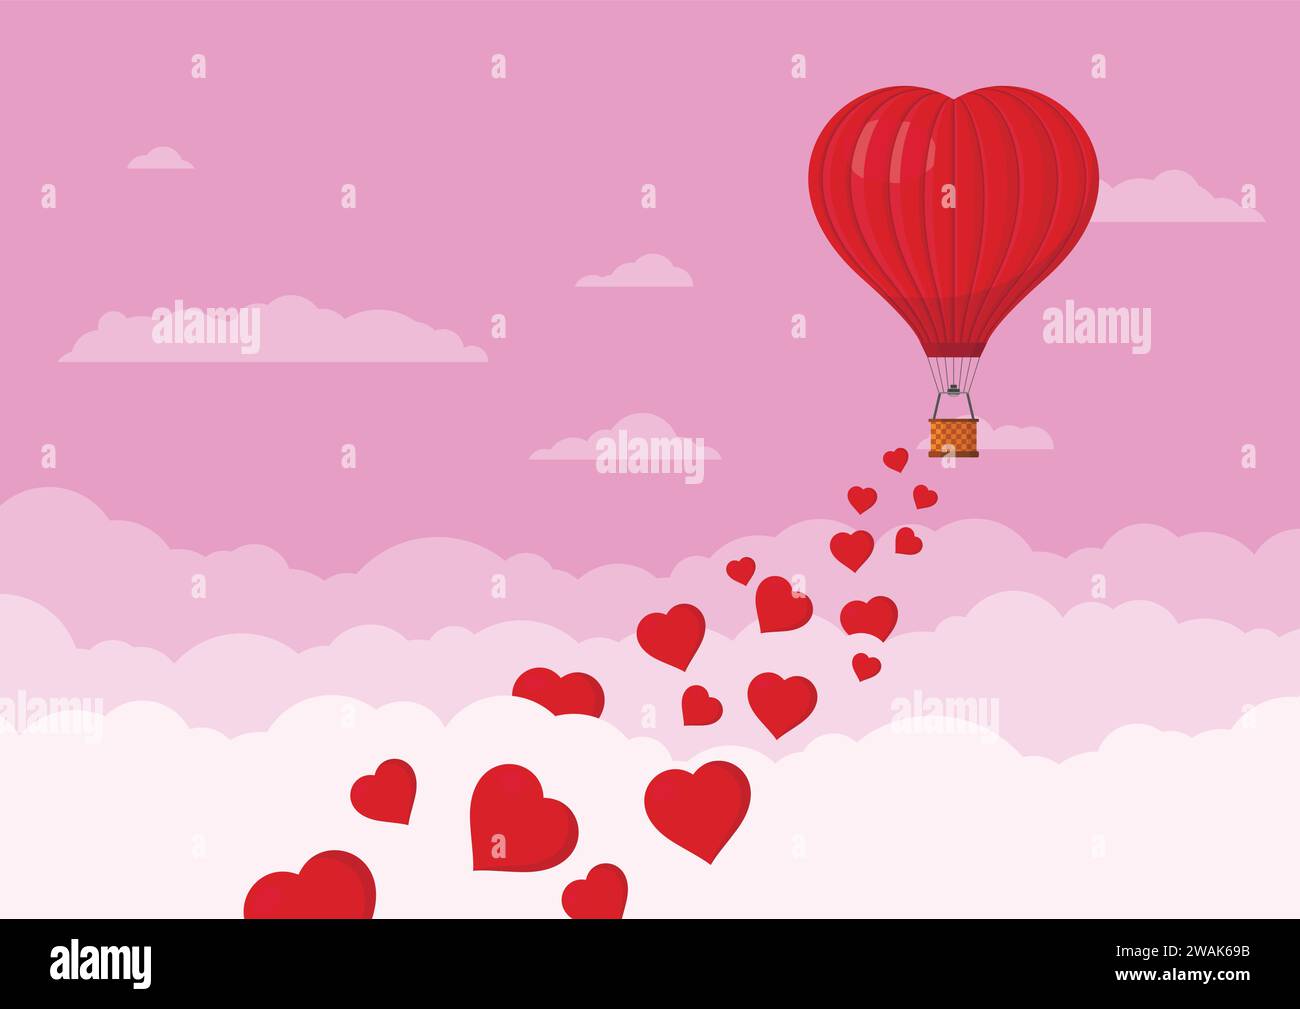 Red heart air balloons flying in the pink sky with clouds. Saint Valentine's day greeting card. Hot air balloon shape of a heart with basket. Vector i Stock Vector